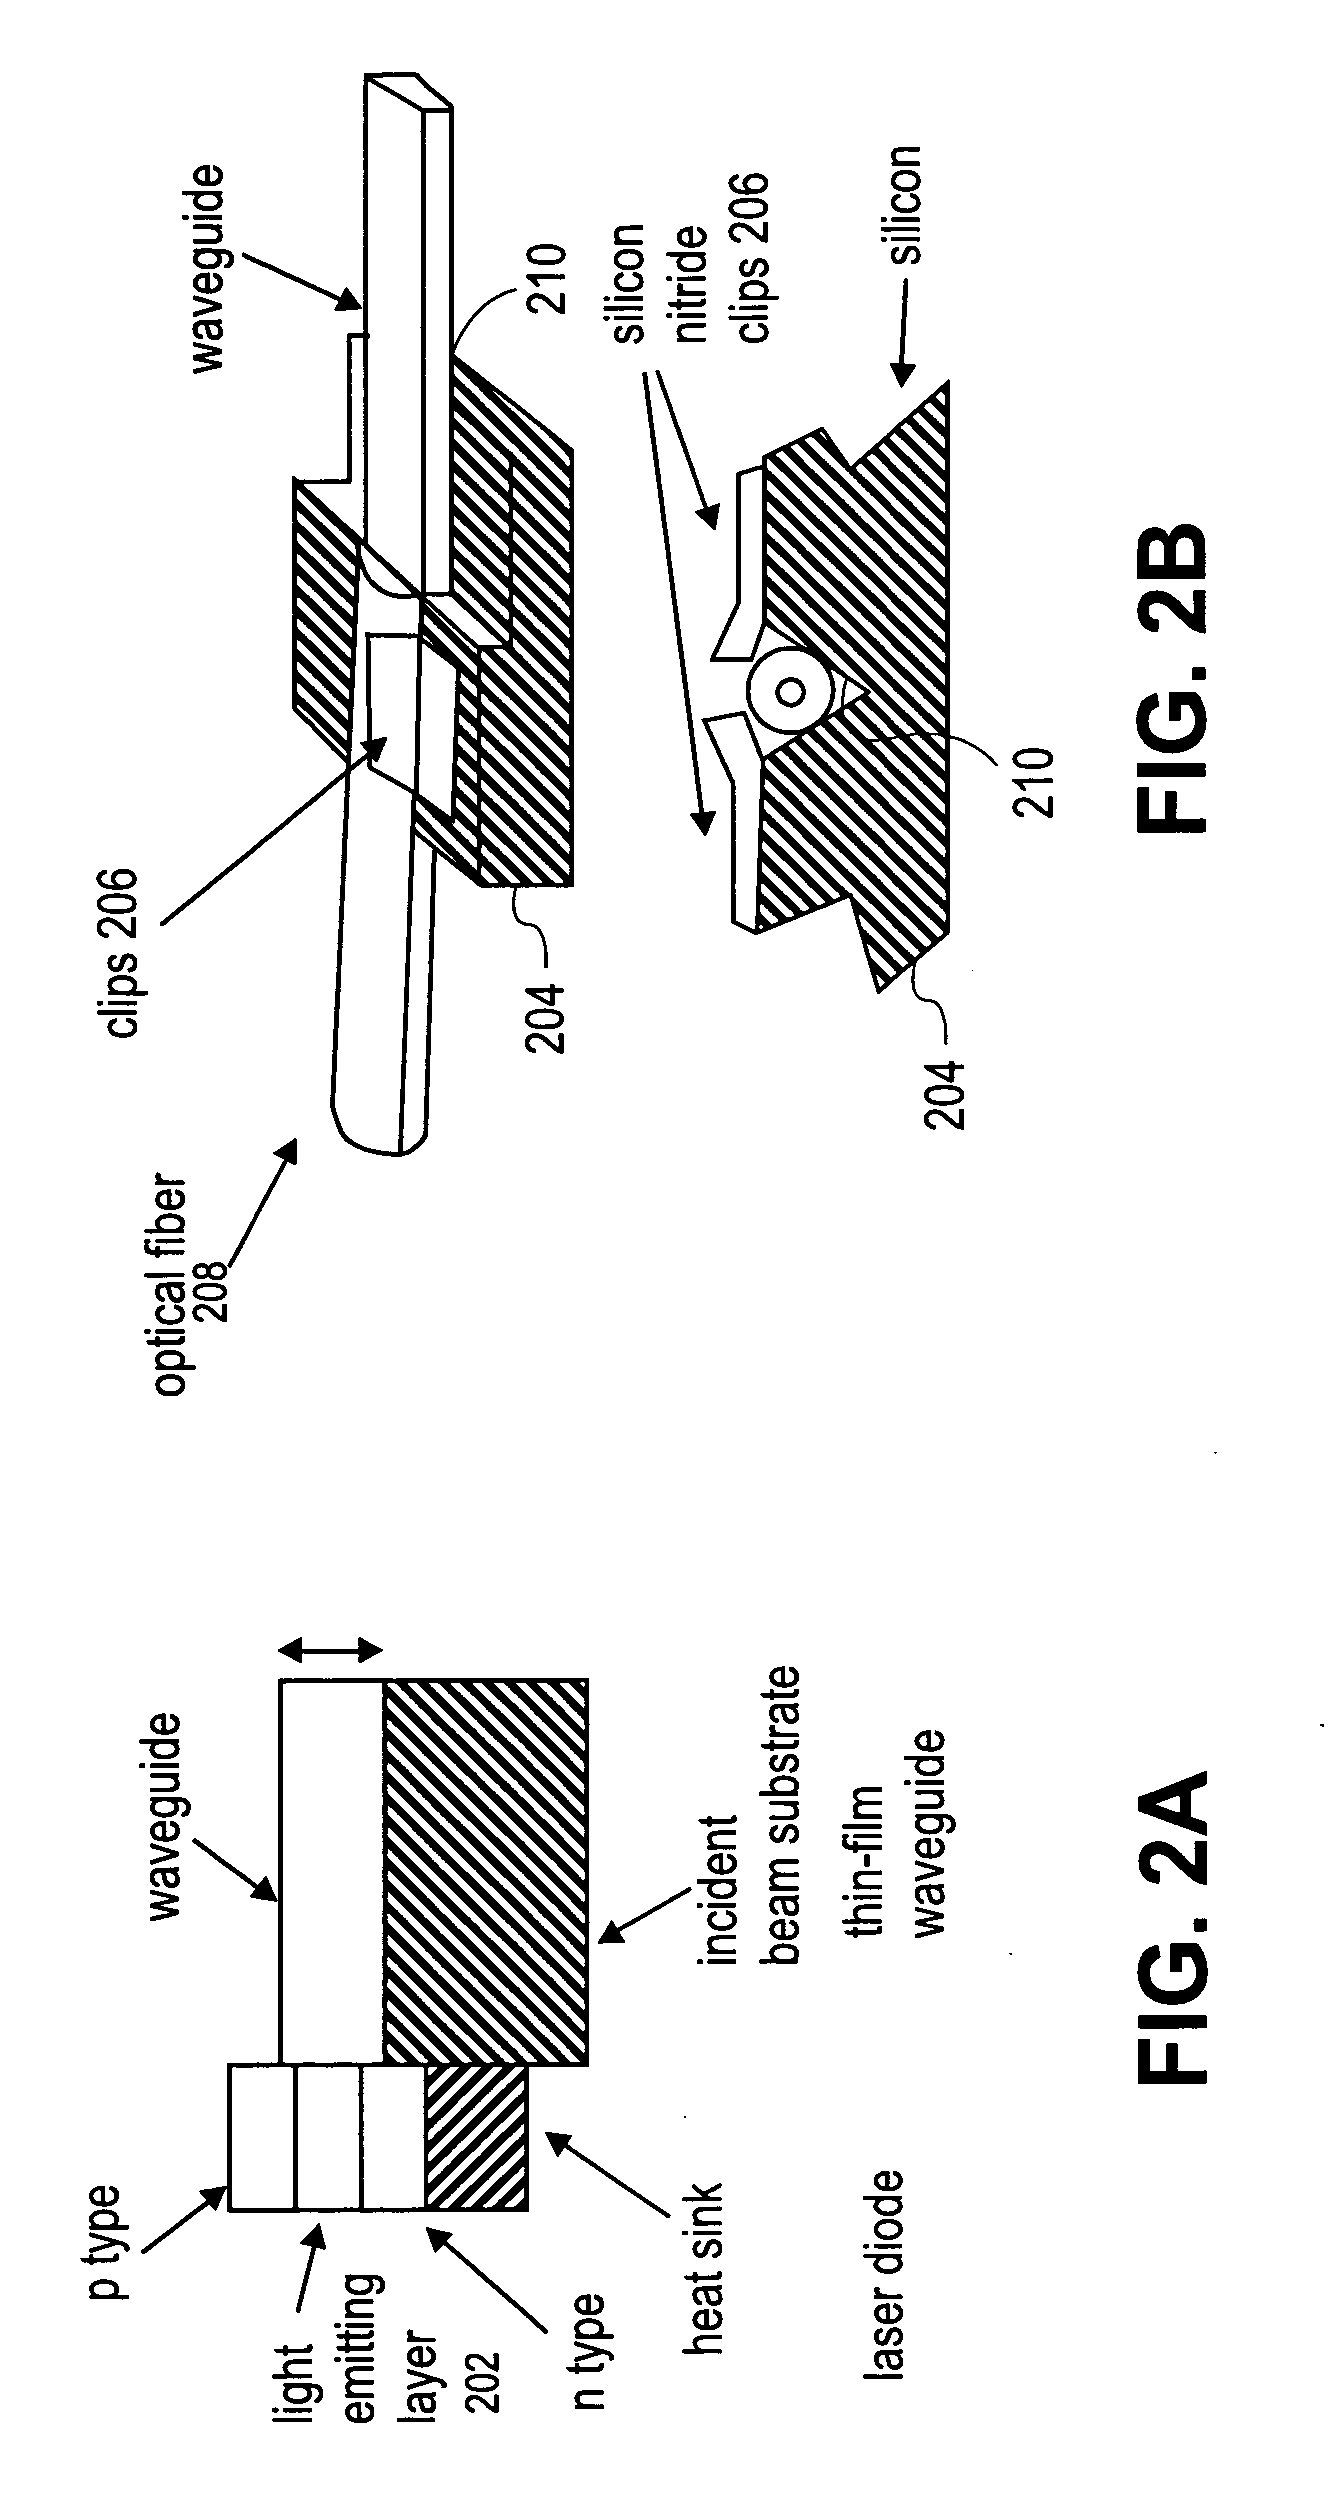 Polymer based electro-optic scanner for image acquisition and display